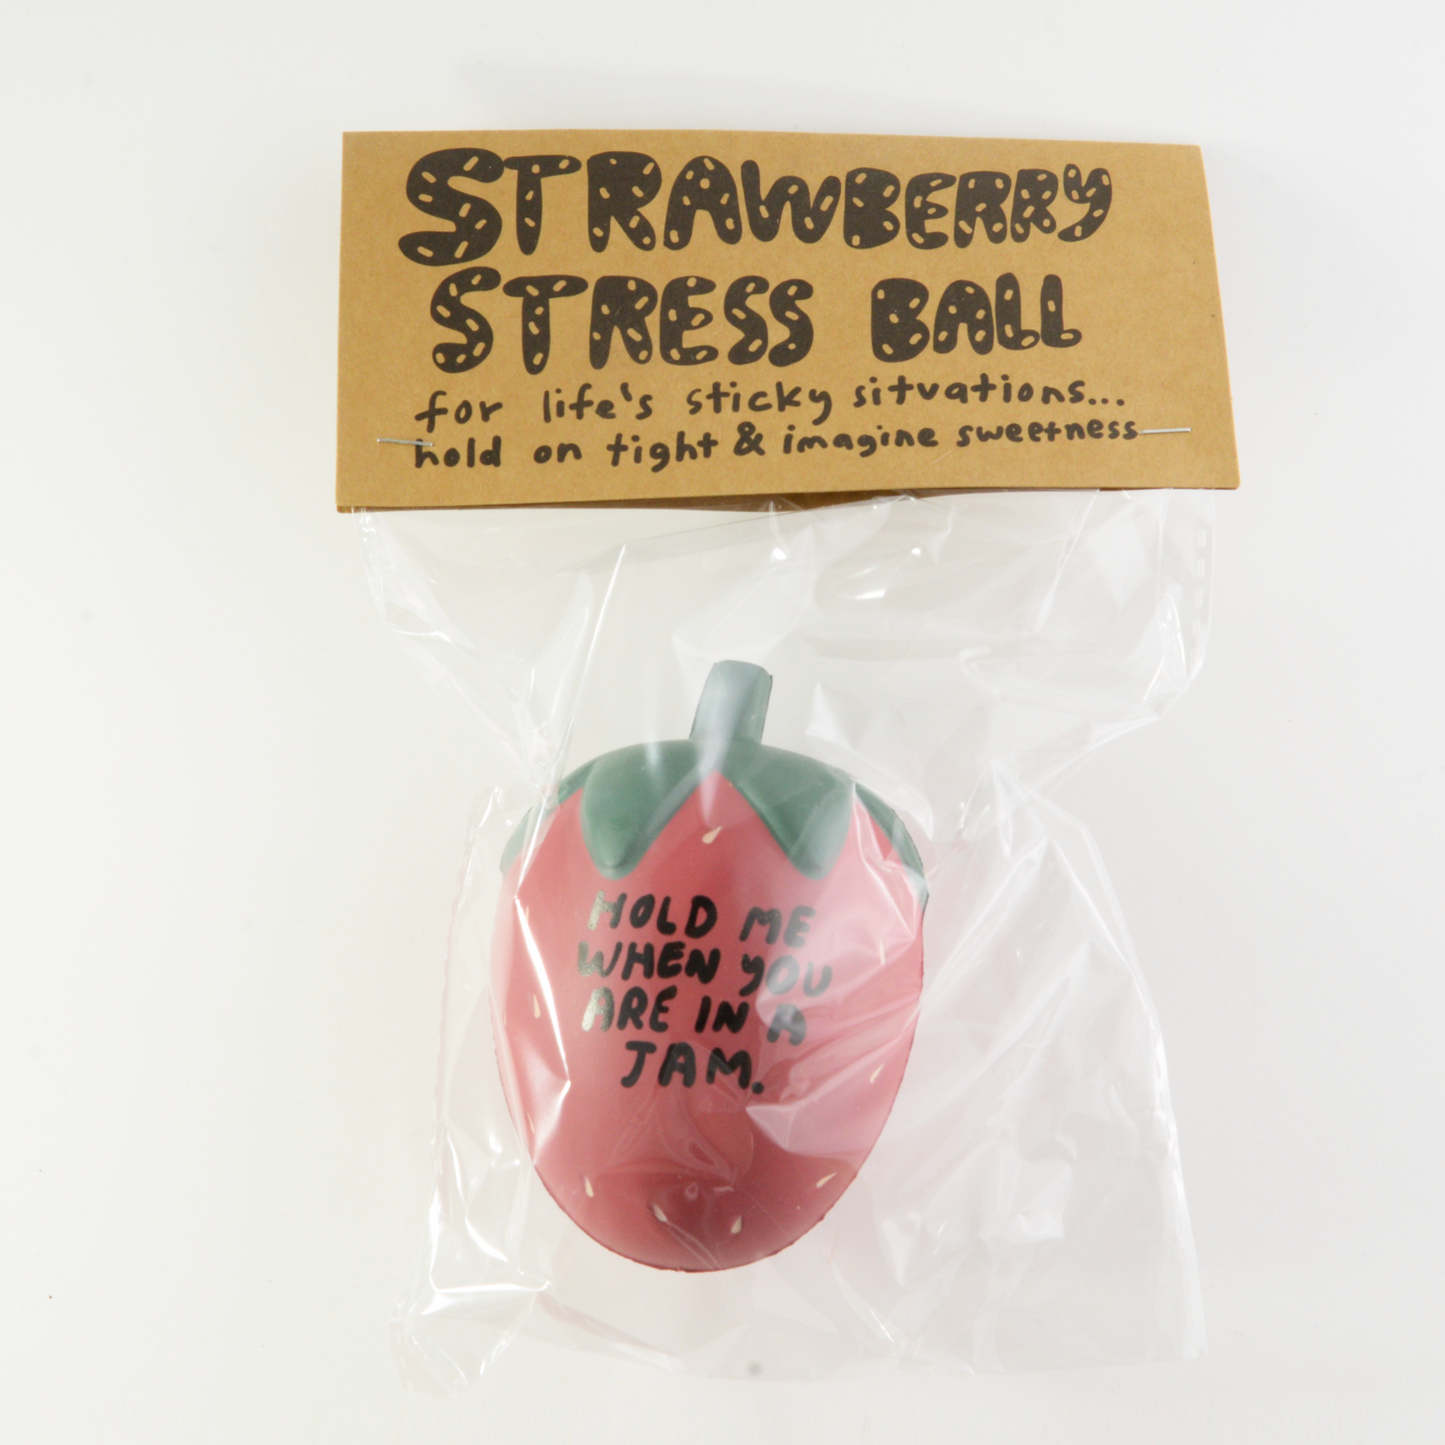 Stress ball that looks like a strawberry and reads "Hold me when you're in a jam"